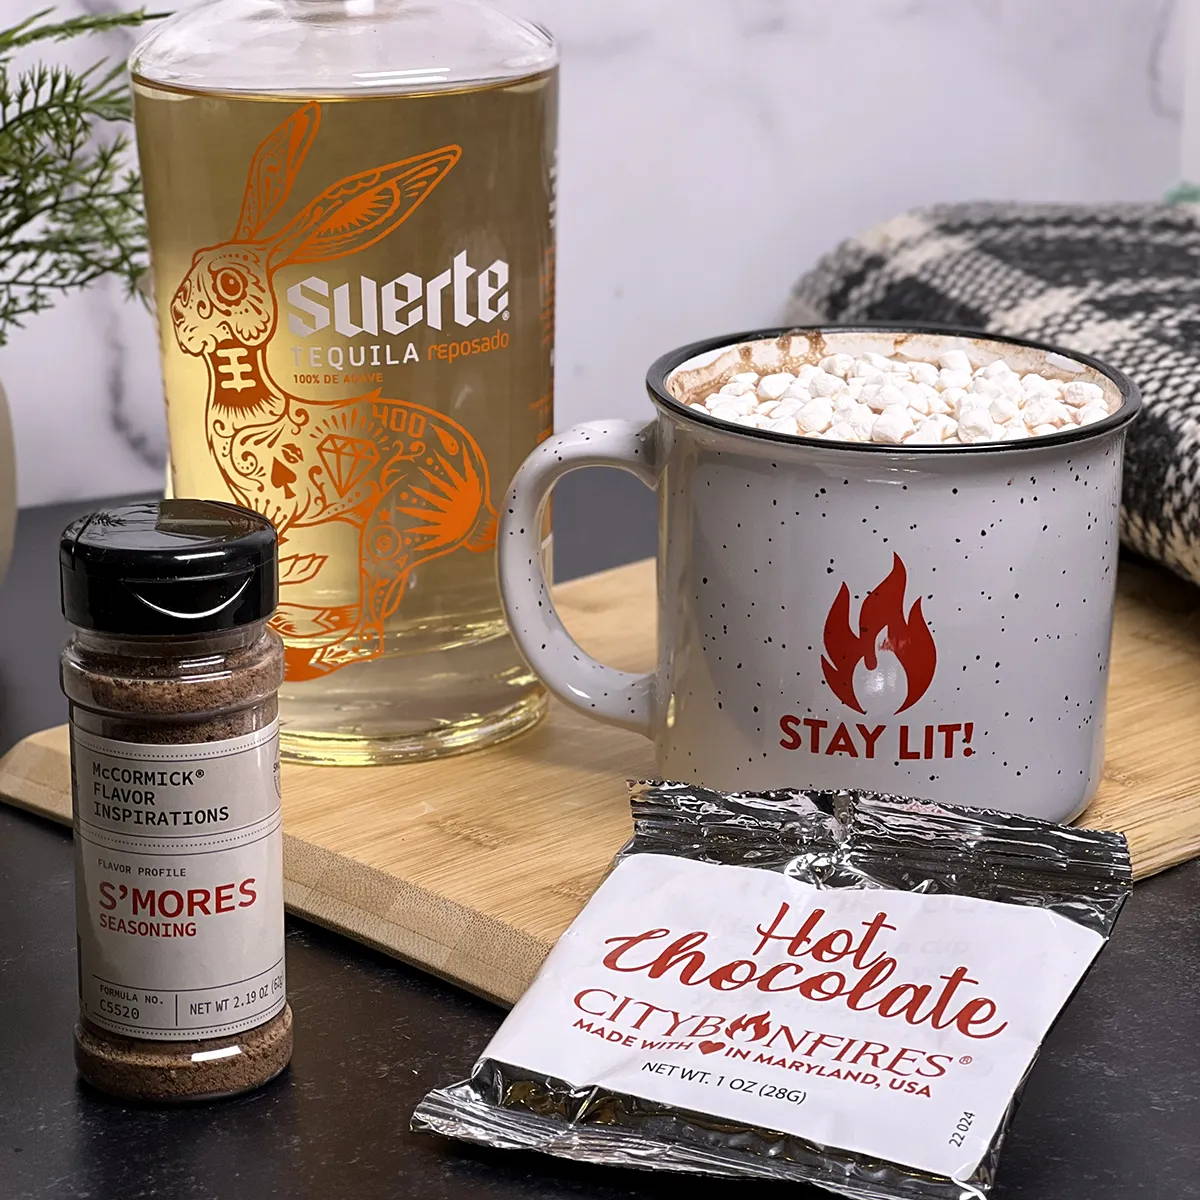 Mexican S’mores Flavored Hot Chocolate with Tequila Recipe